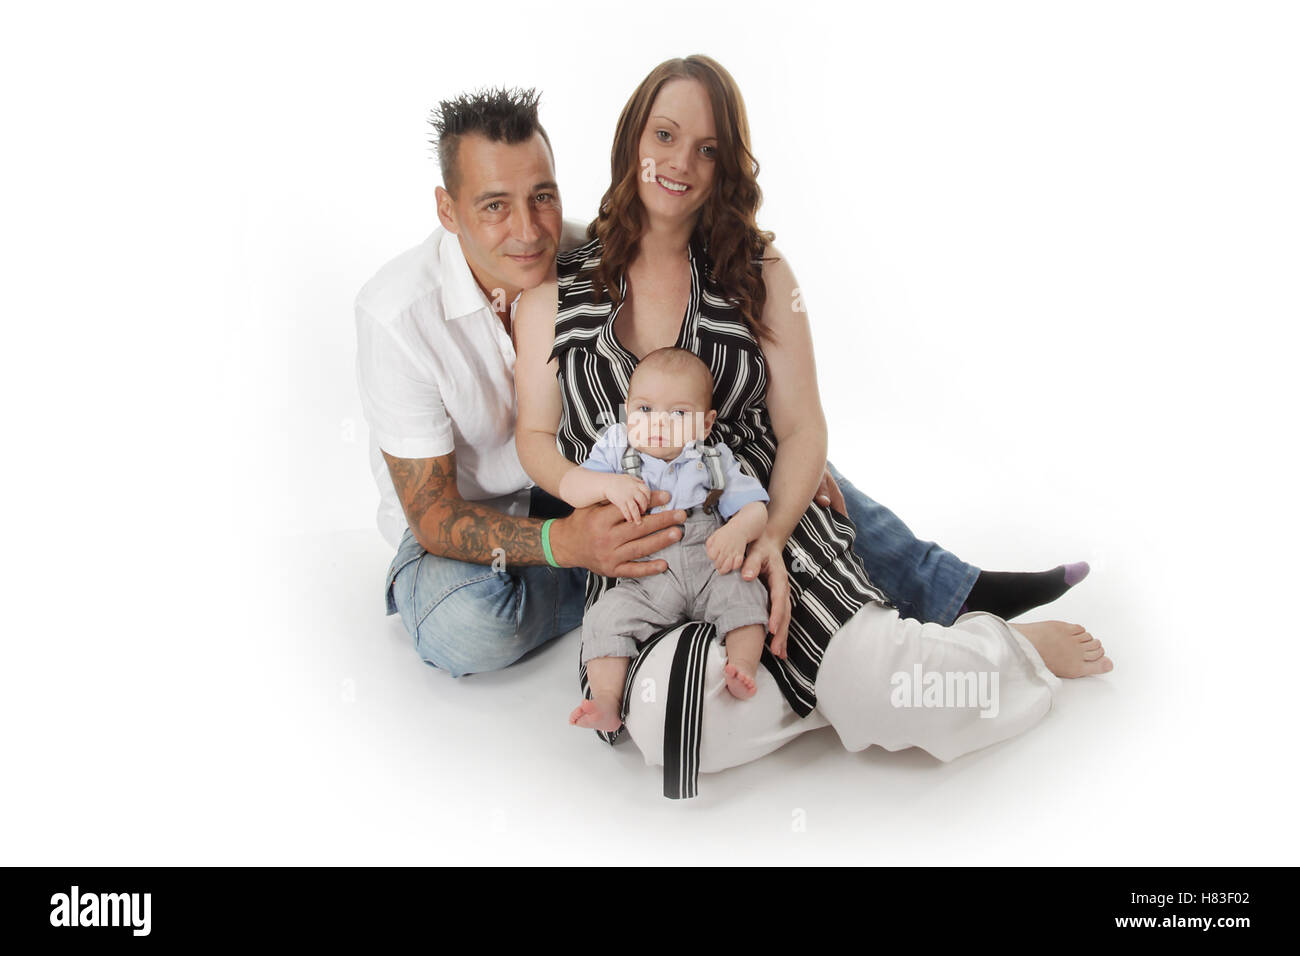 Mummy and daddy holding new born baby, family Stock Photo